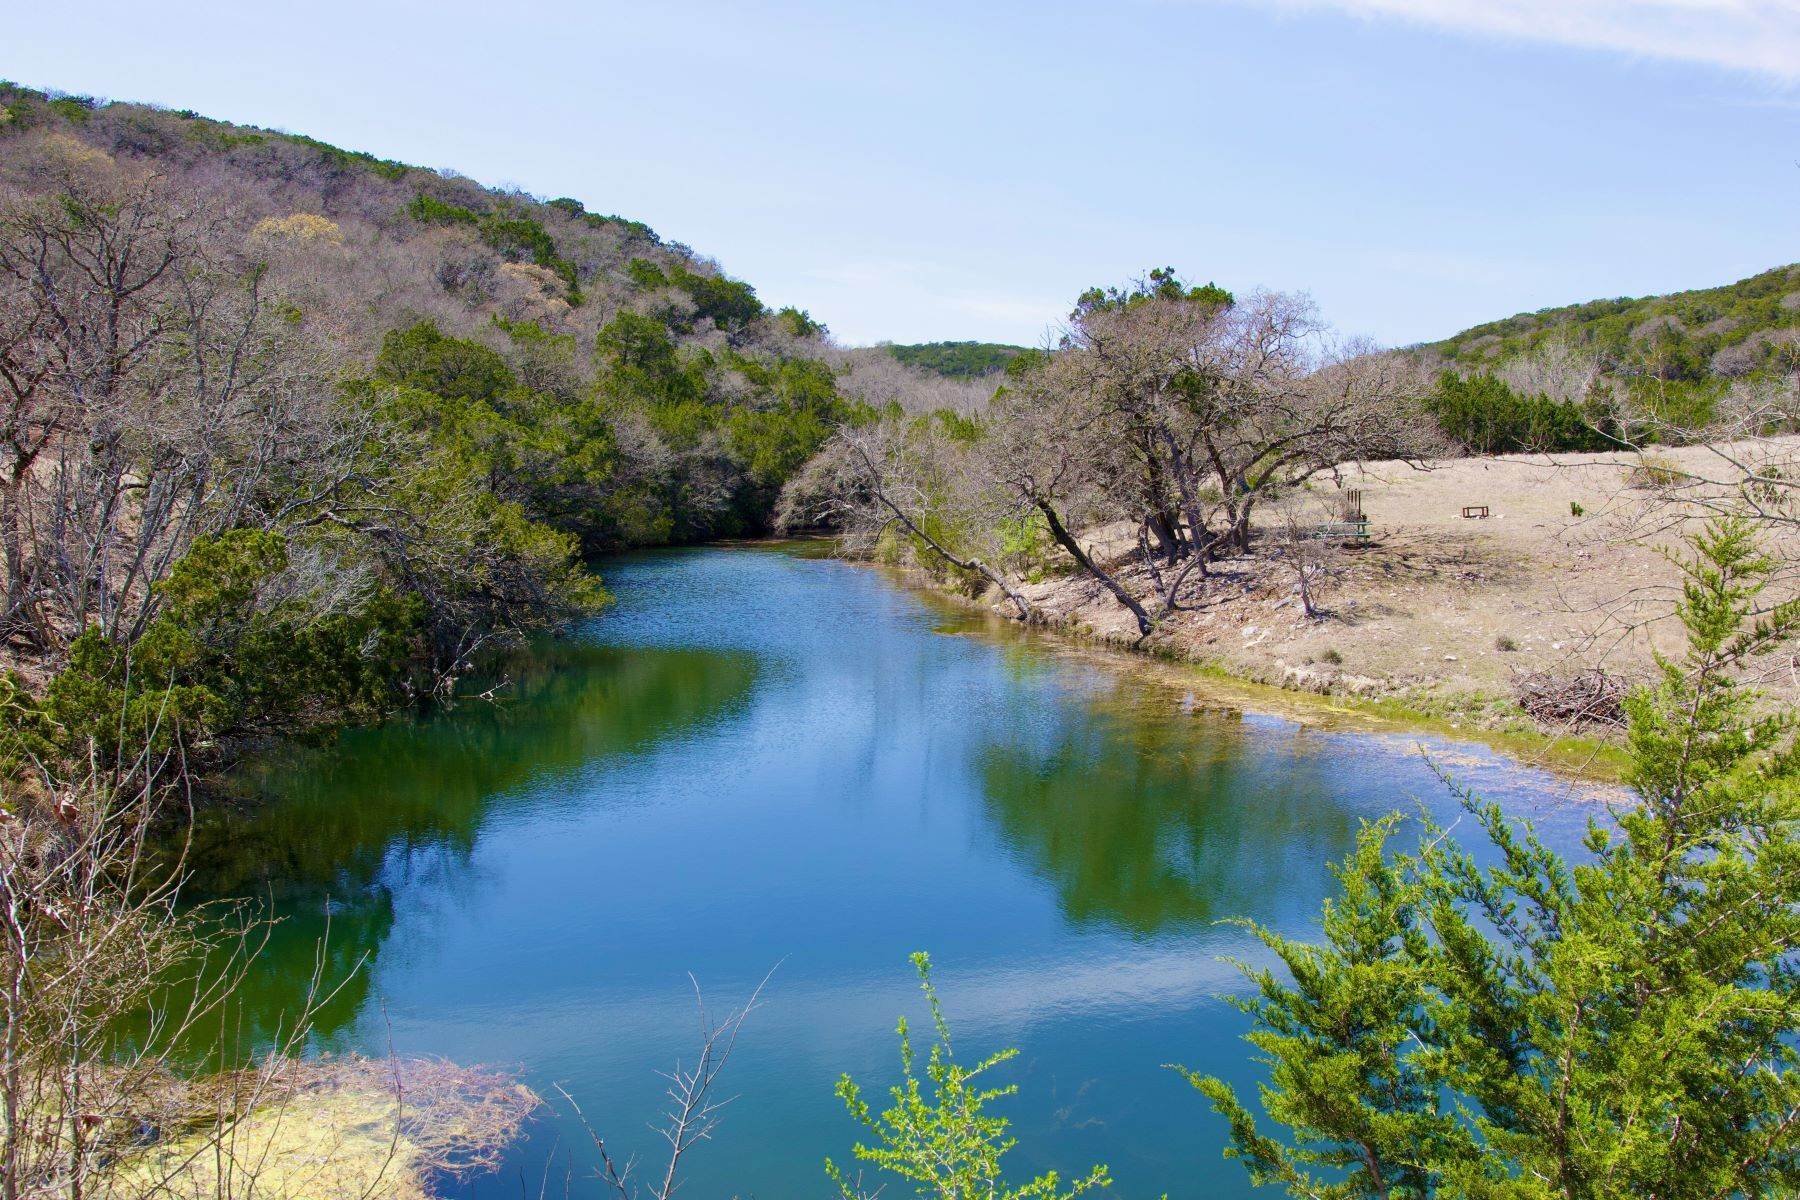 Farm and Ranch Properties for Sale at 2,269.85+/- Acres Less Ranch, Kendall County, Boerne, TX 78006 2,269.85+/- Acres Less Ranch, Kendall County, 650 Wild Turkey Blvd. Boerne, Texas 78006 United States